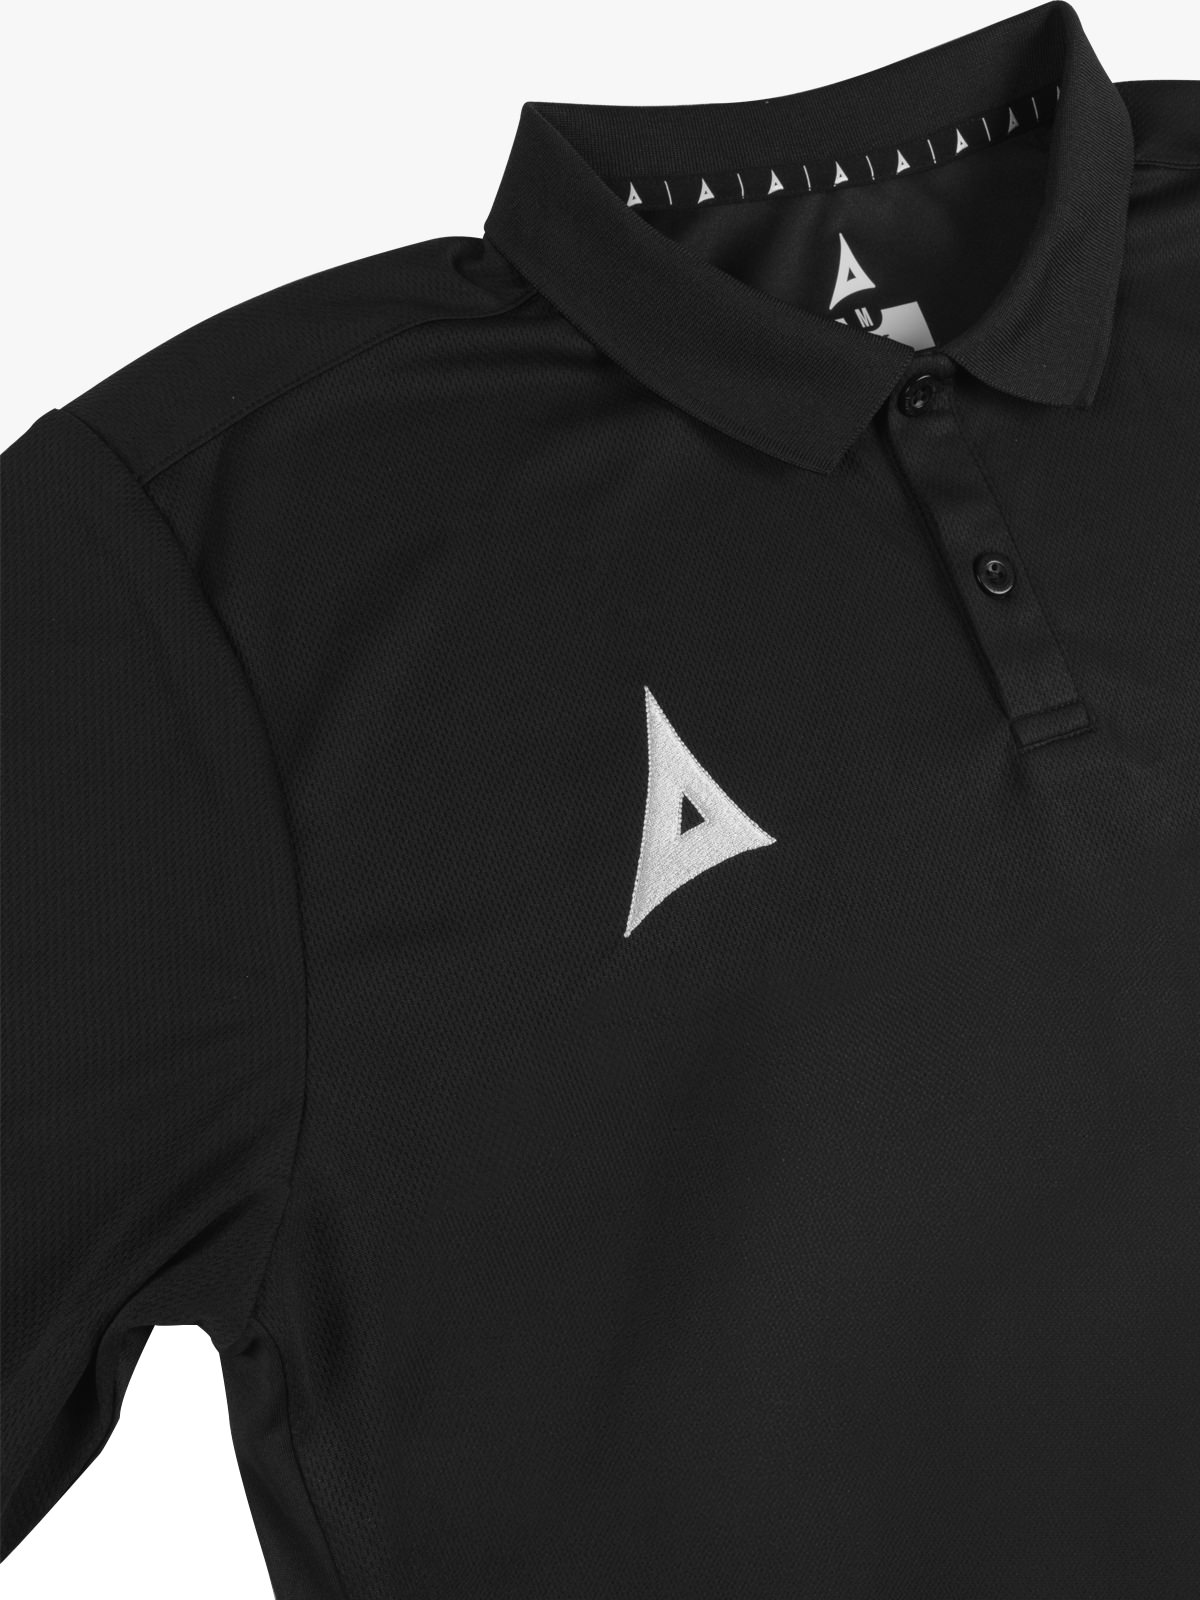 picture of focus 2 tech polo - black